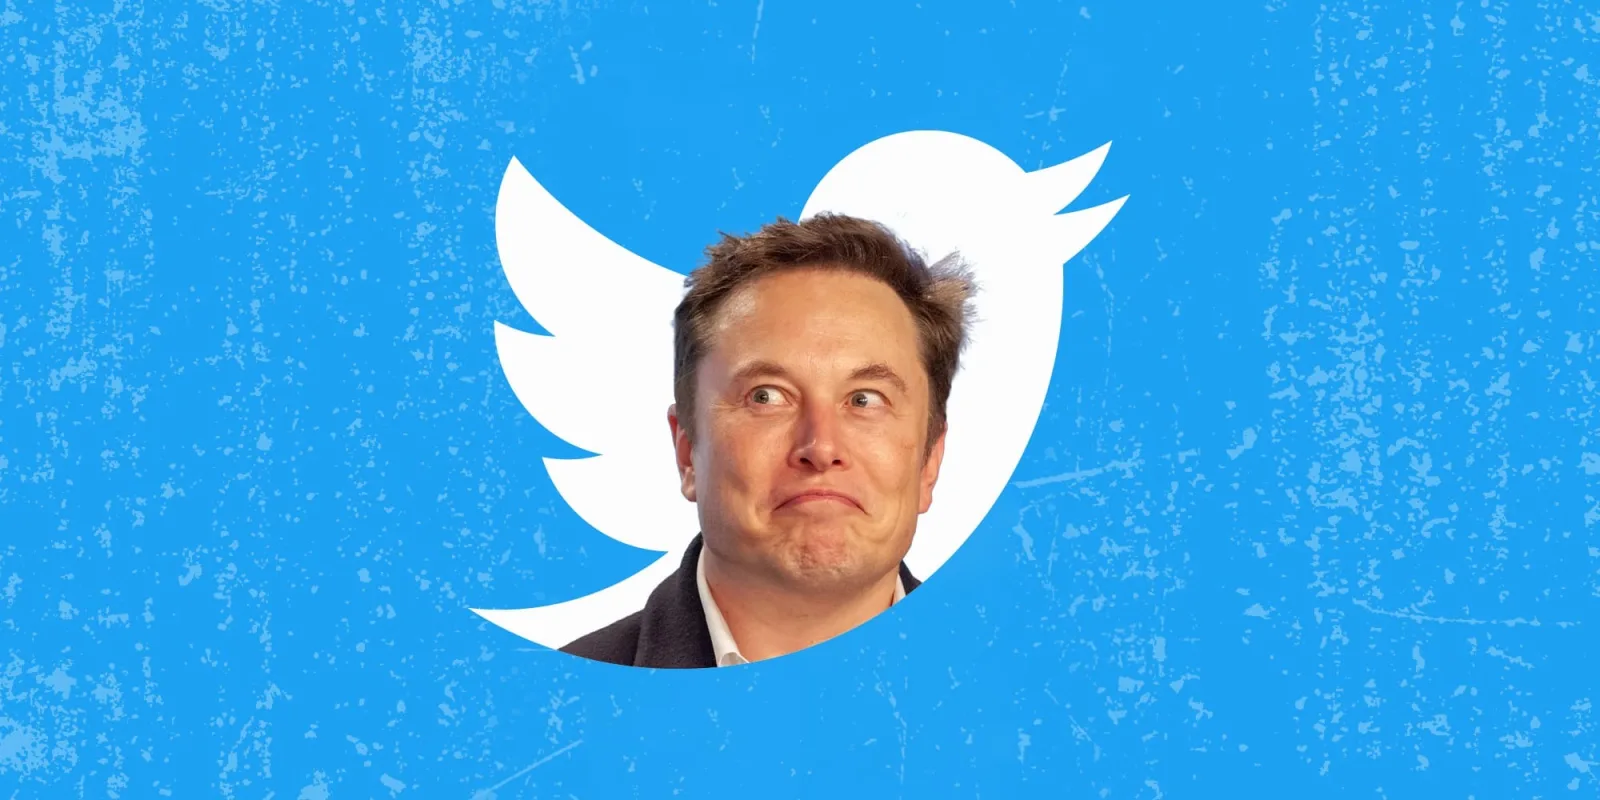 Musk: The Bird Is Freed